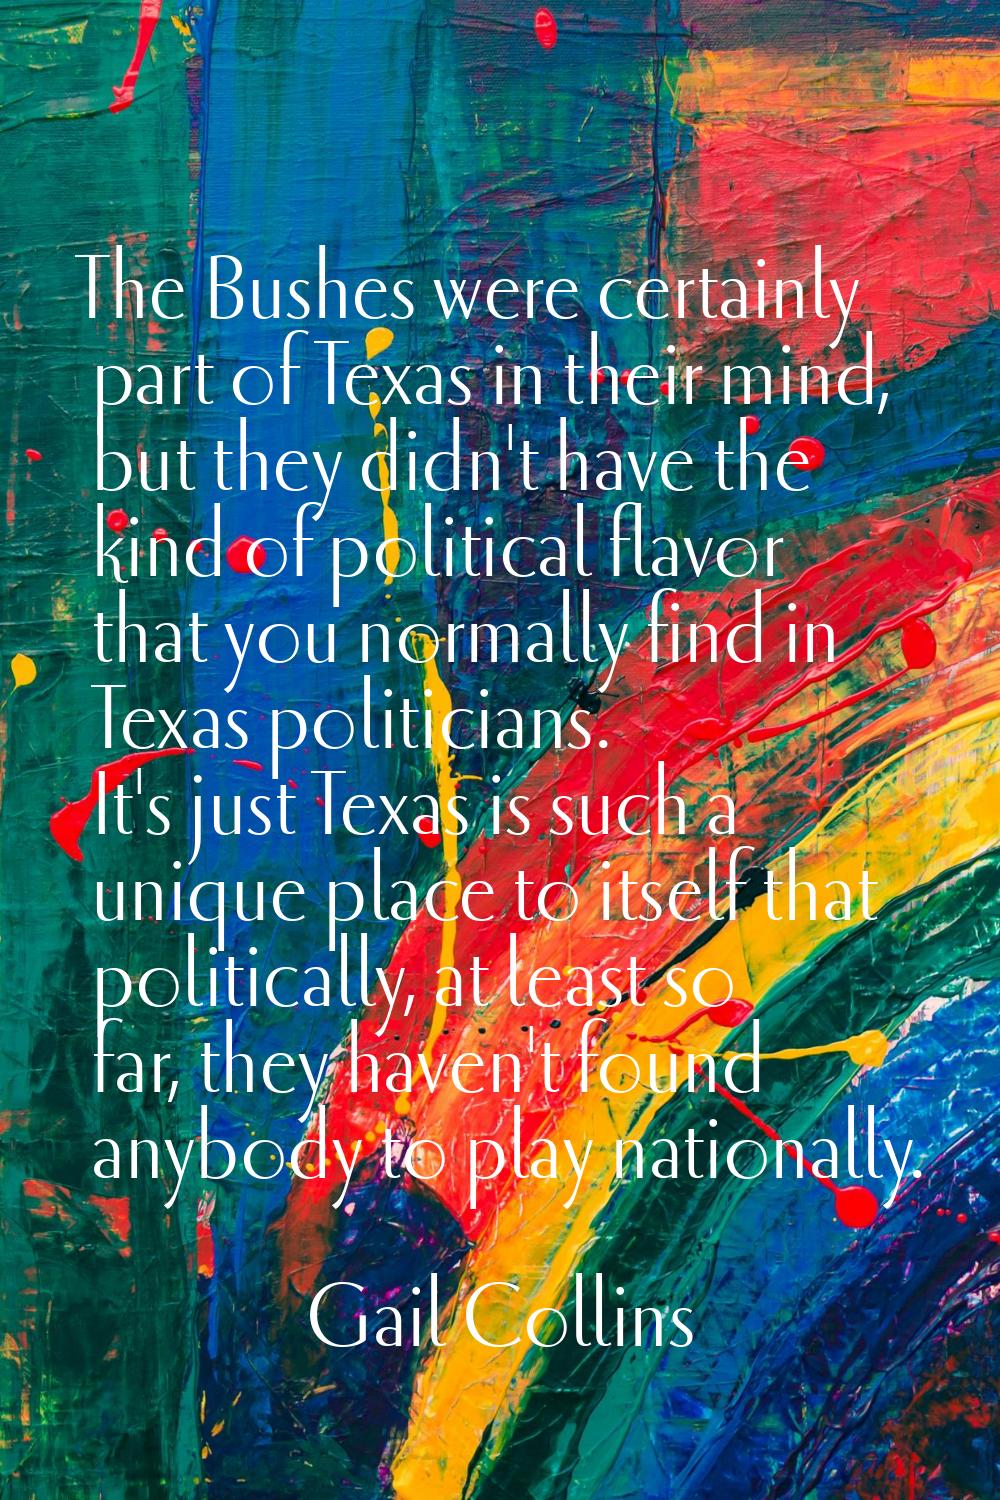 The Bushes were certainly part of Texas in their mind, but they didn't have the kind of political f